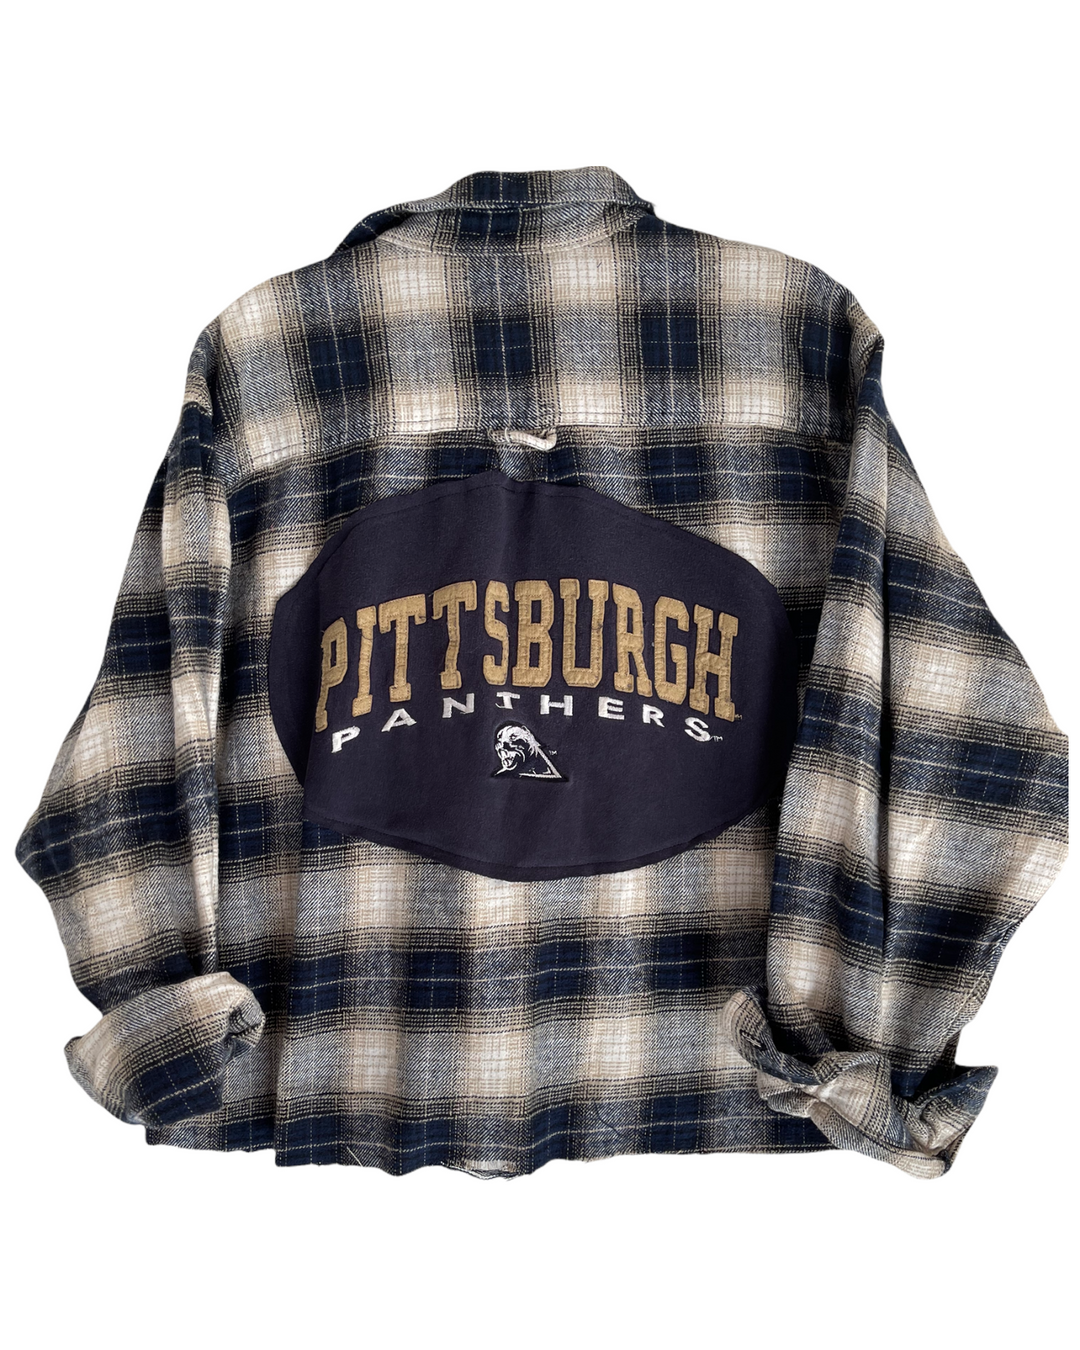 Pittsburgh Patched Flannel